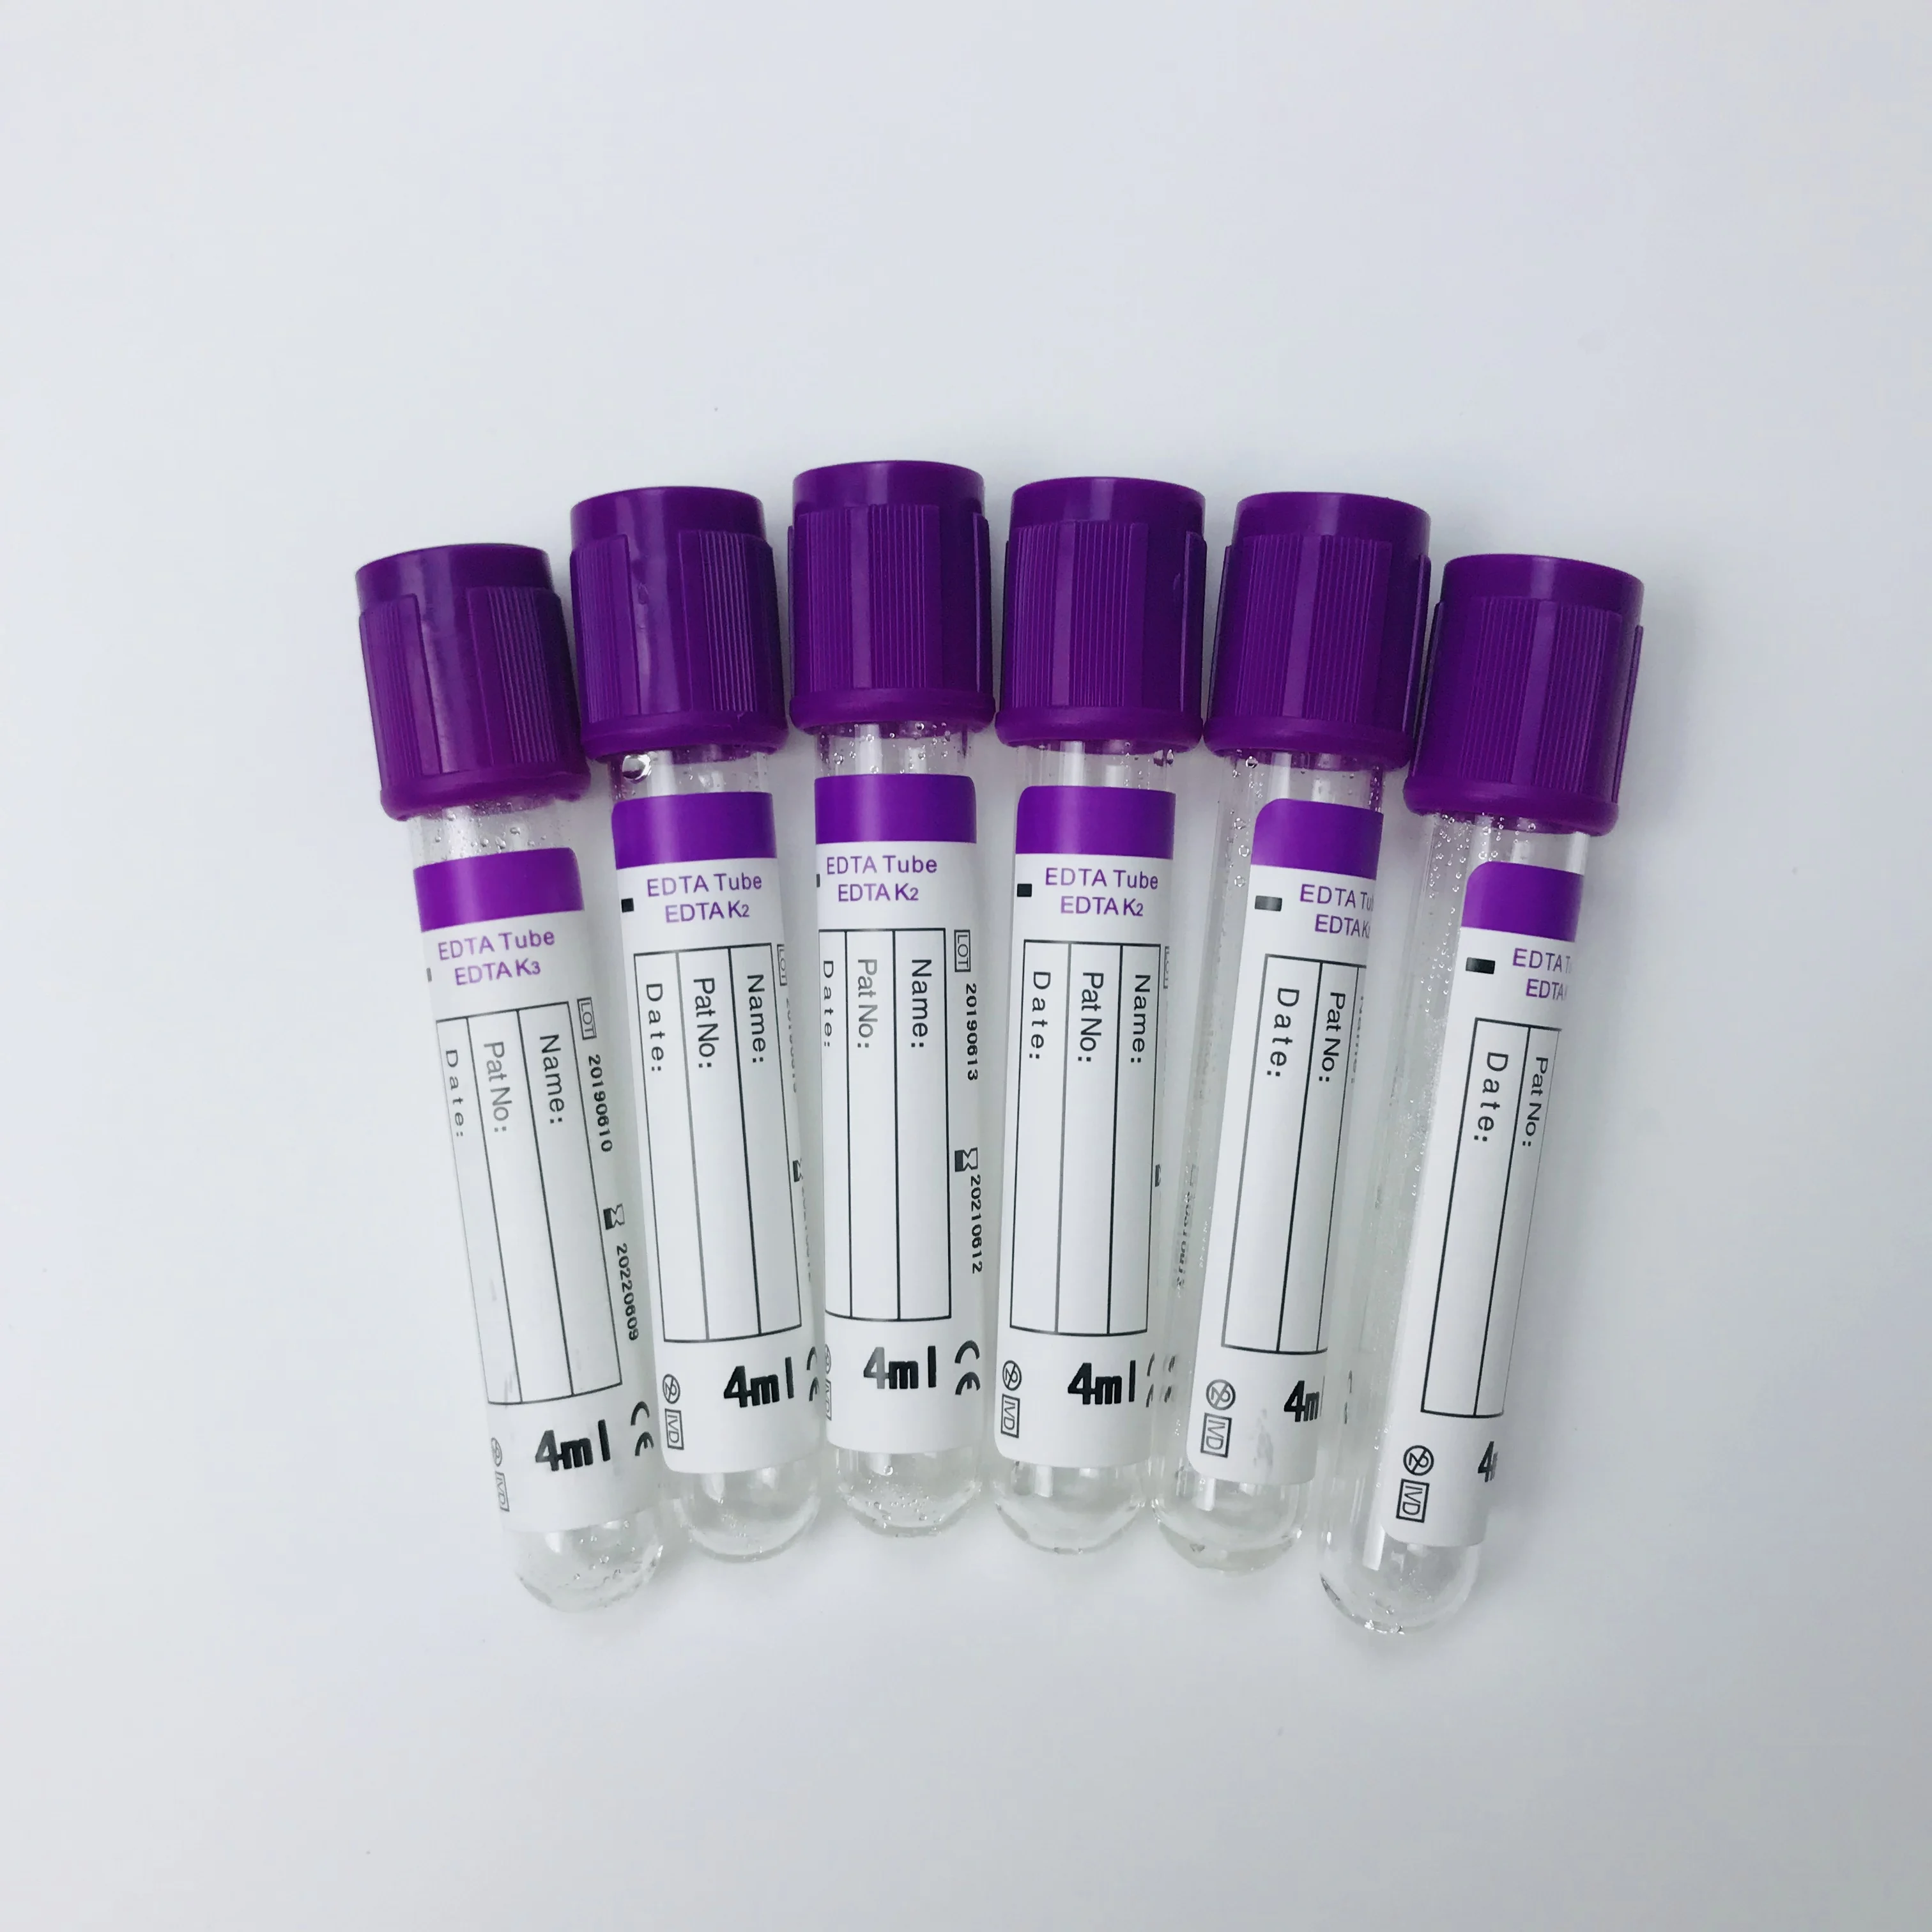 High Quality Plastic Blood Collection Tube Edta Buy High Quality Hospital Blood Tube High Quality Heparin Lithium High Quality Blood Tube Collection Product On Alibaba Com